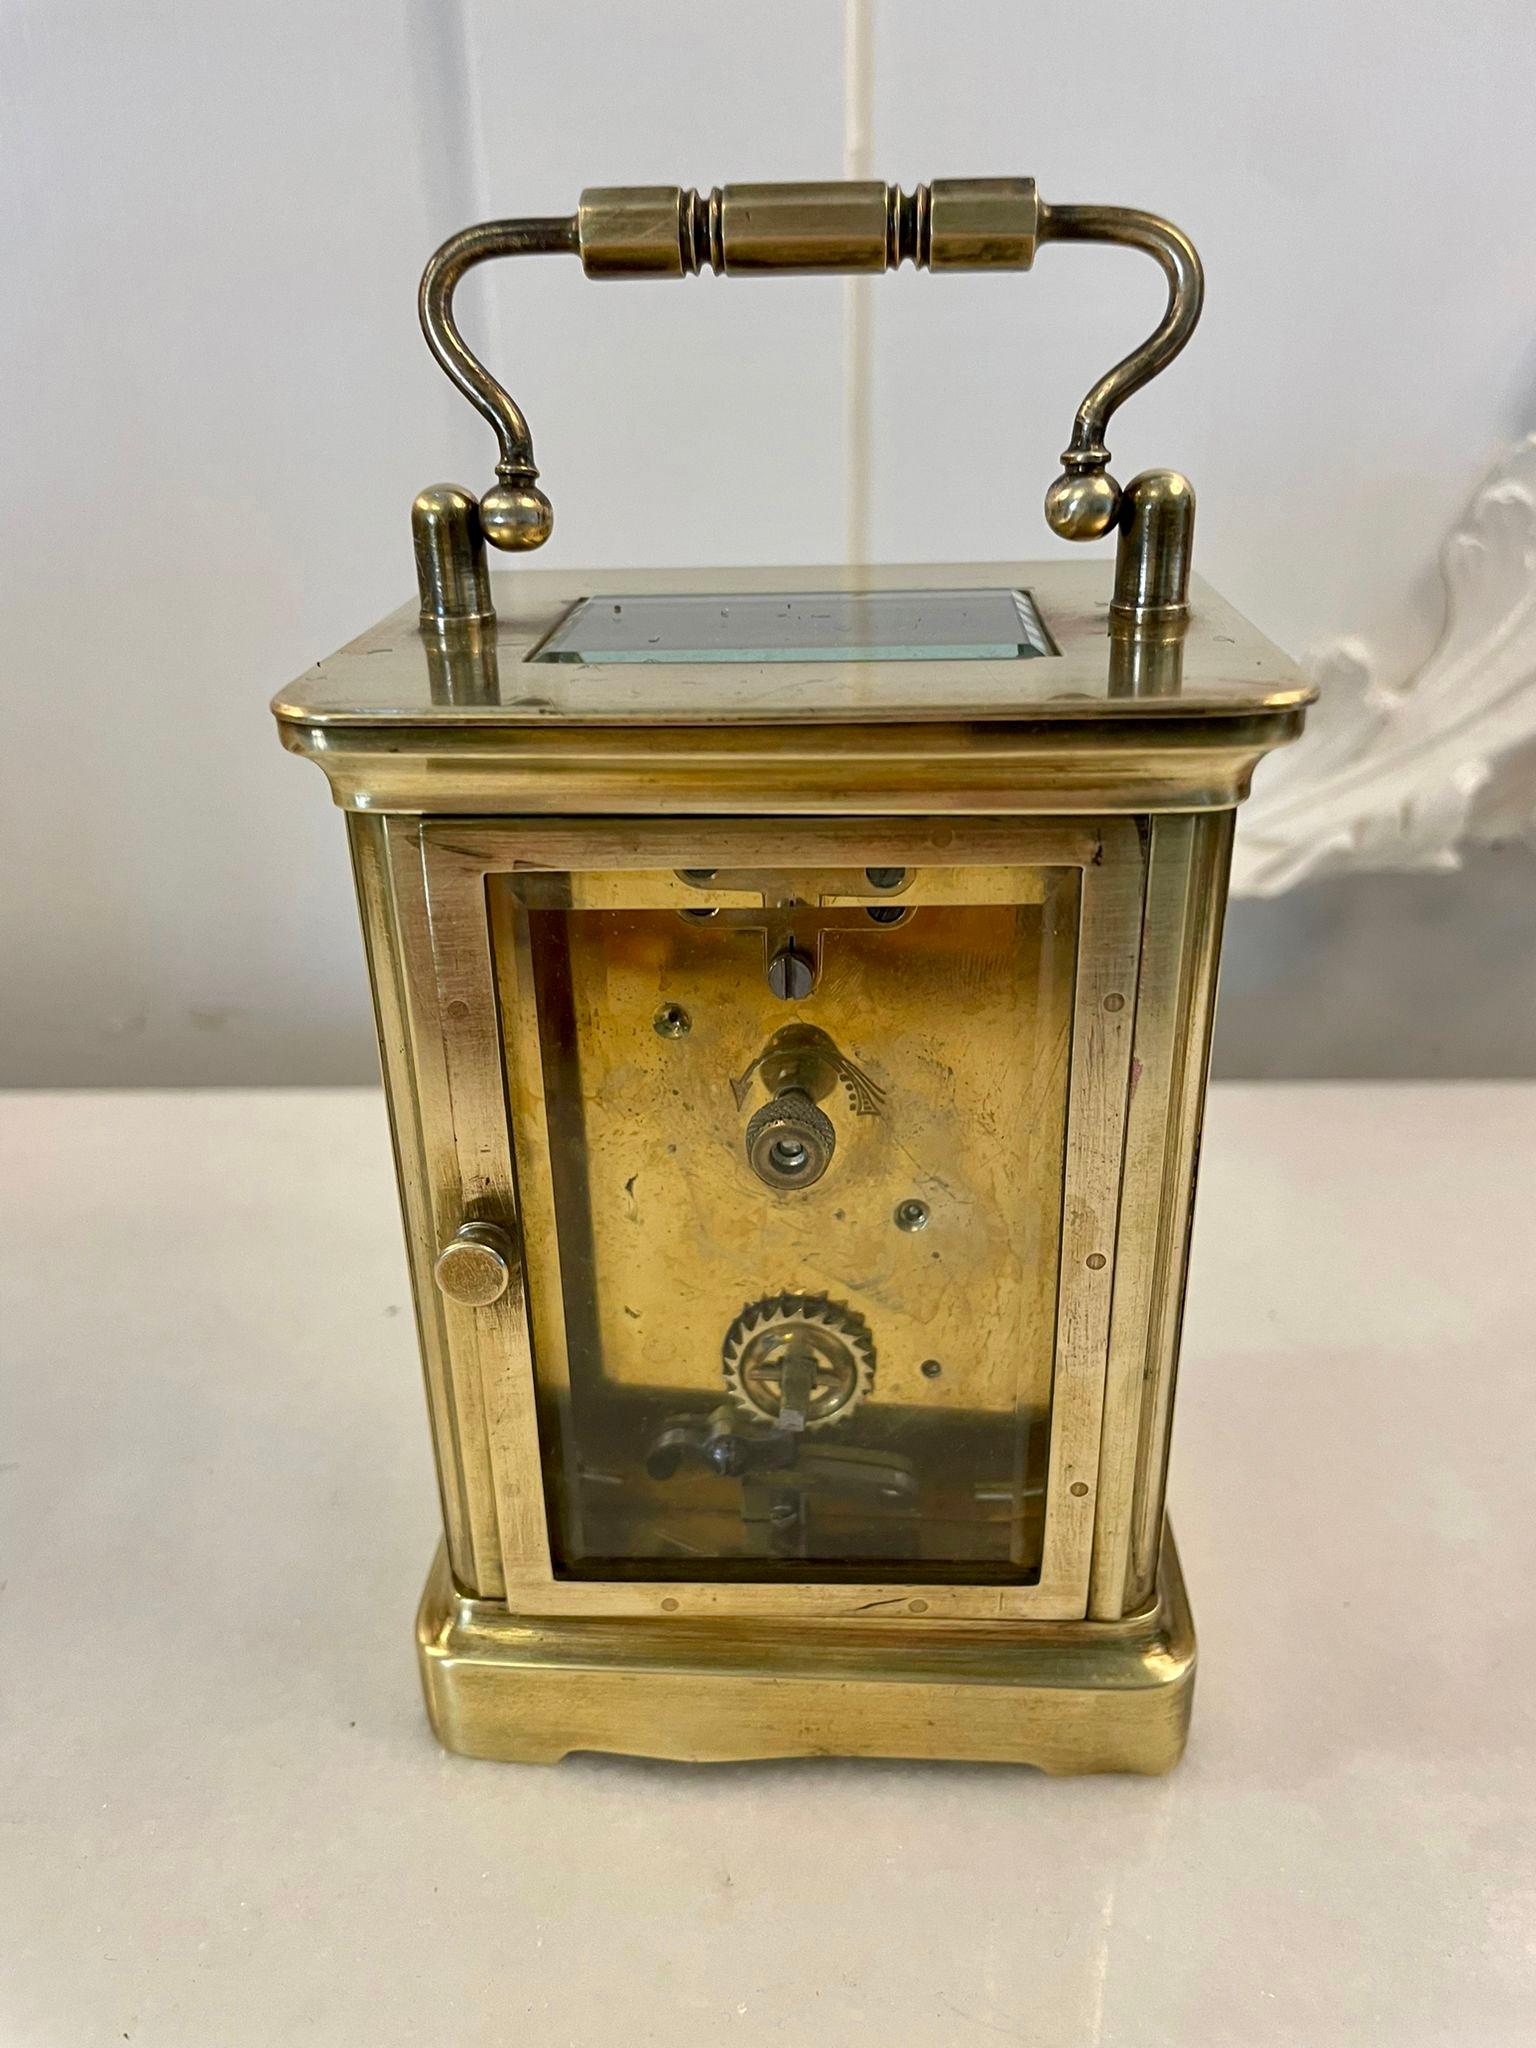 Antique Victorian quality brass carriage clock having a bevelled edge,  glass panels,  white enamel dial with Roman numerals,  original hands,  8 day movement and a shaped carrying handle to the top 


In good working order


Dimensions:
Height 14.5